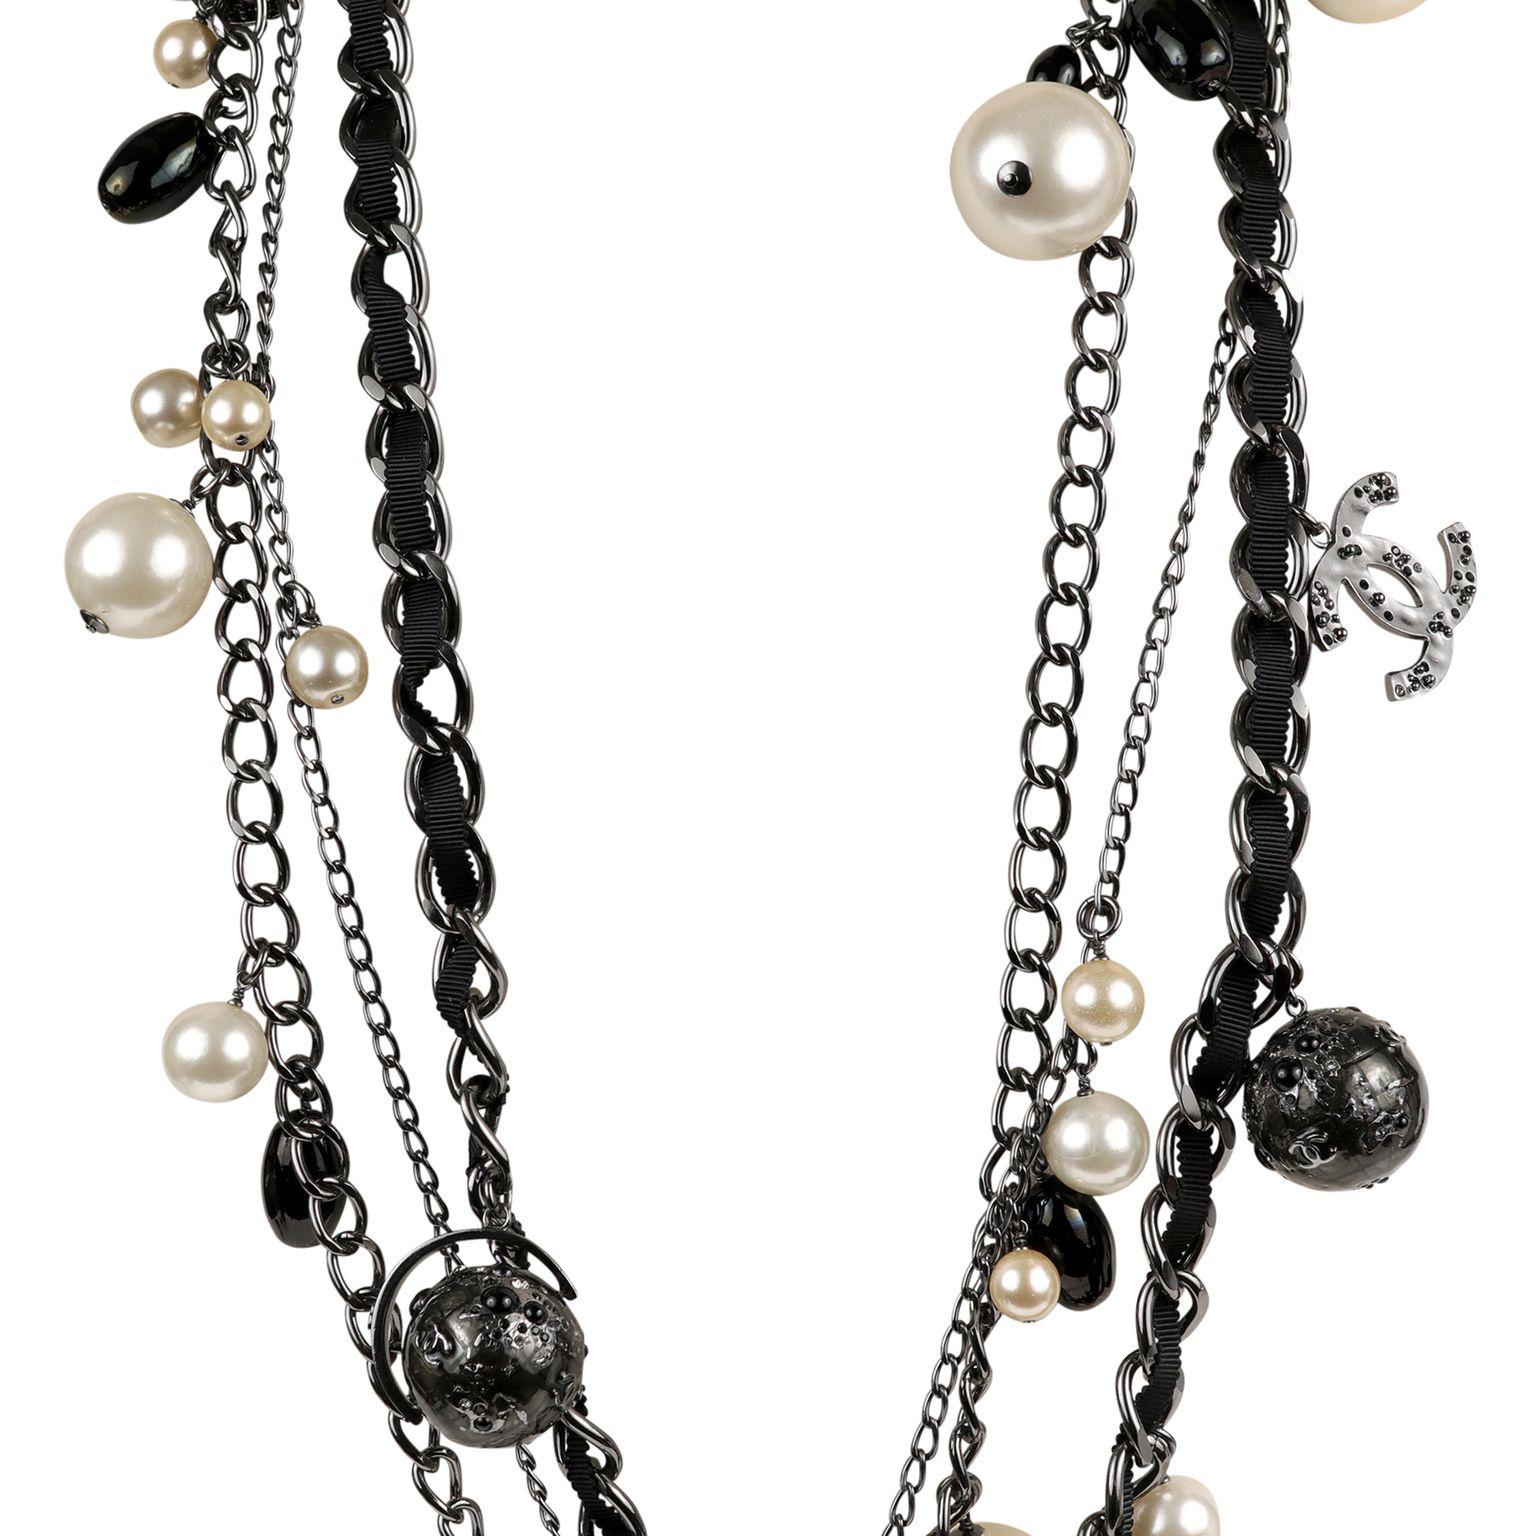 Women's or Men's Chanel Ruthenium Globe Multi Chain Necklace with Pearls For Sale